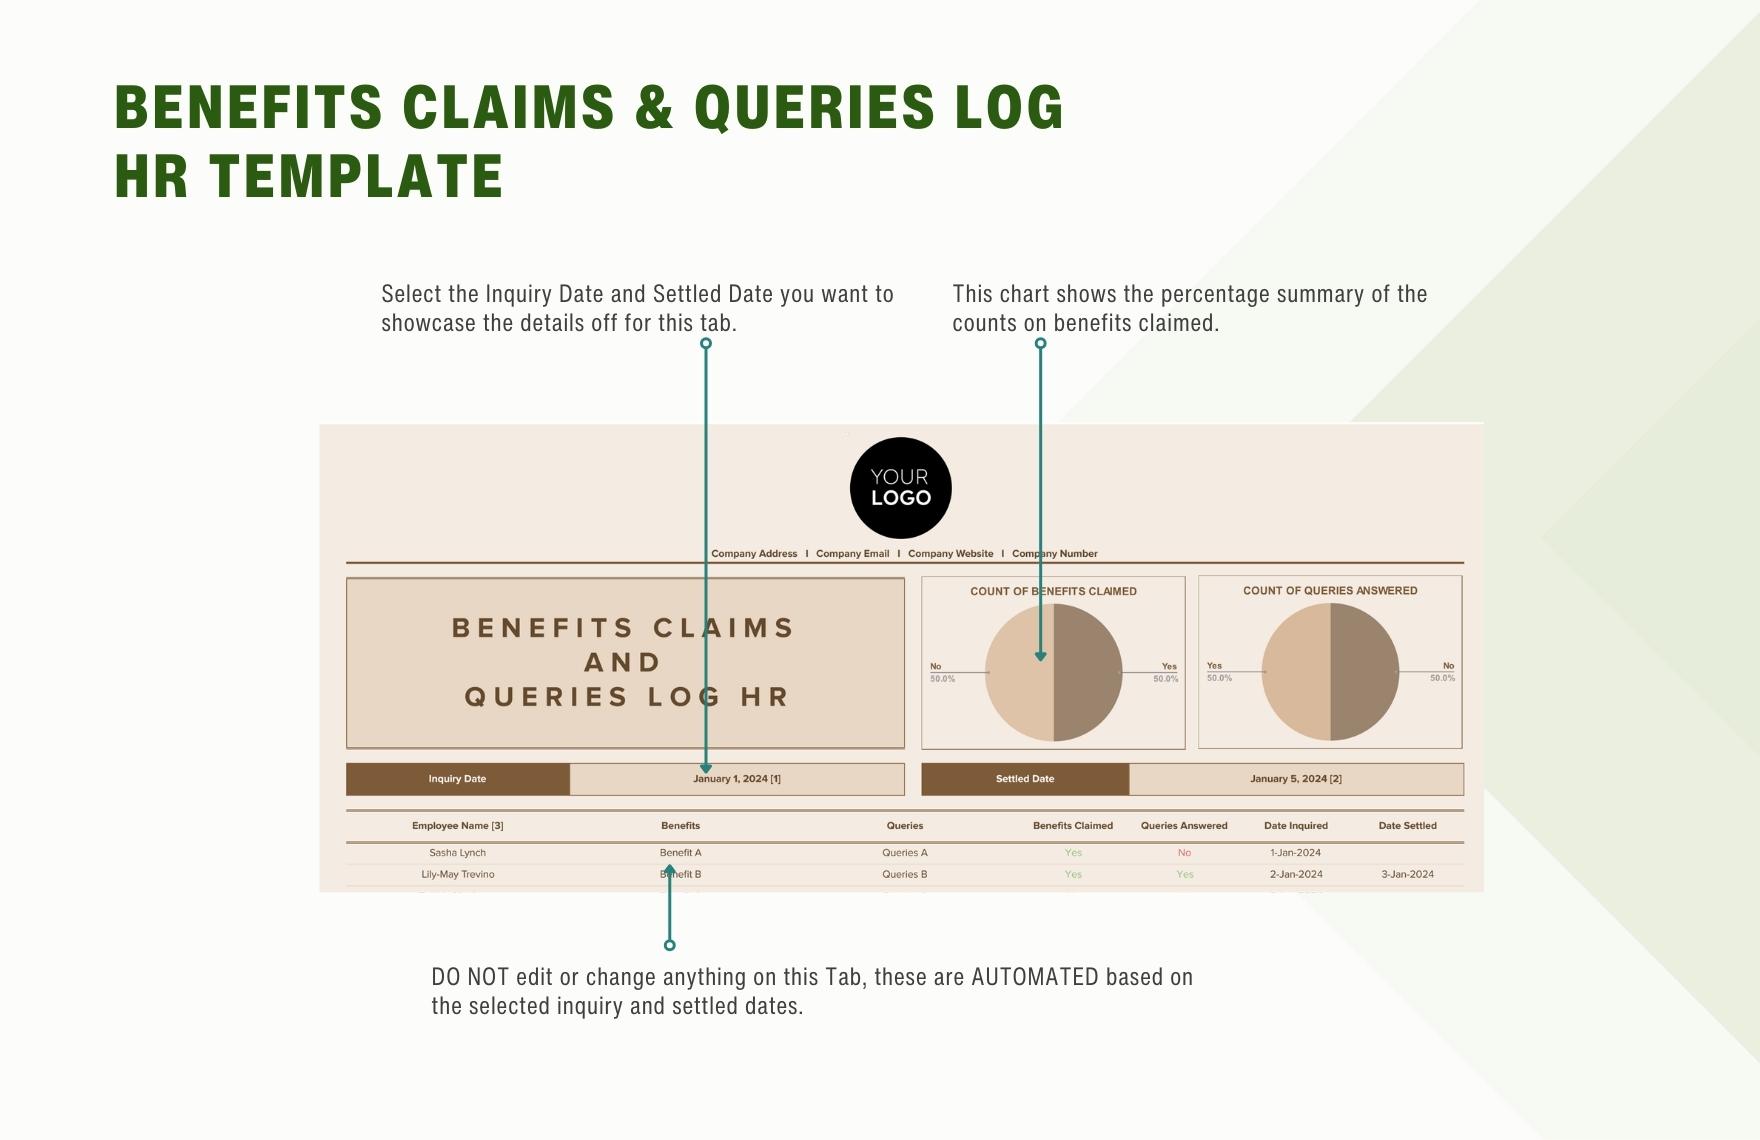 Benefits Claims & Queries Log HR Template